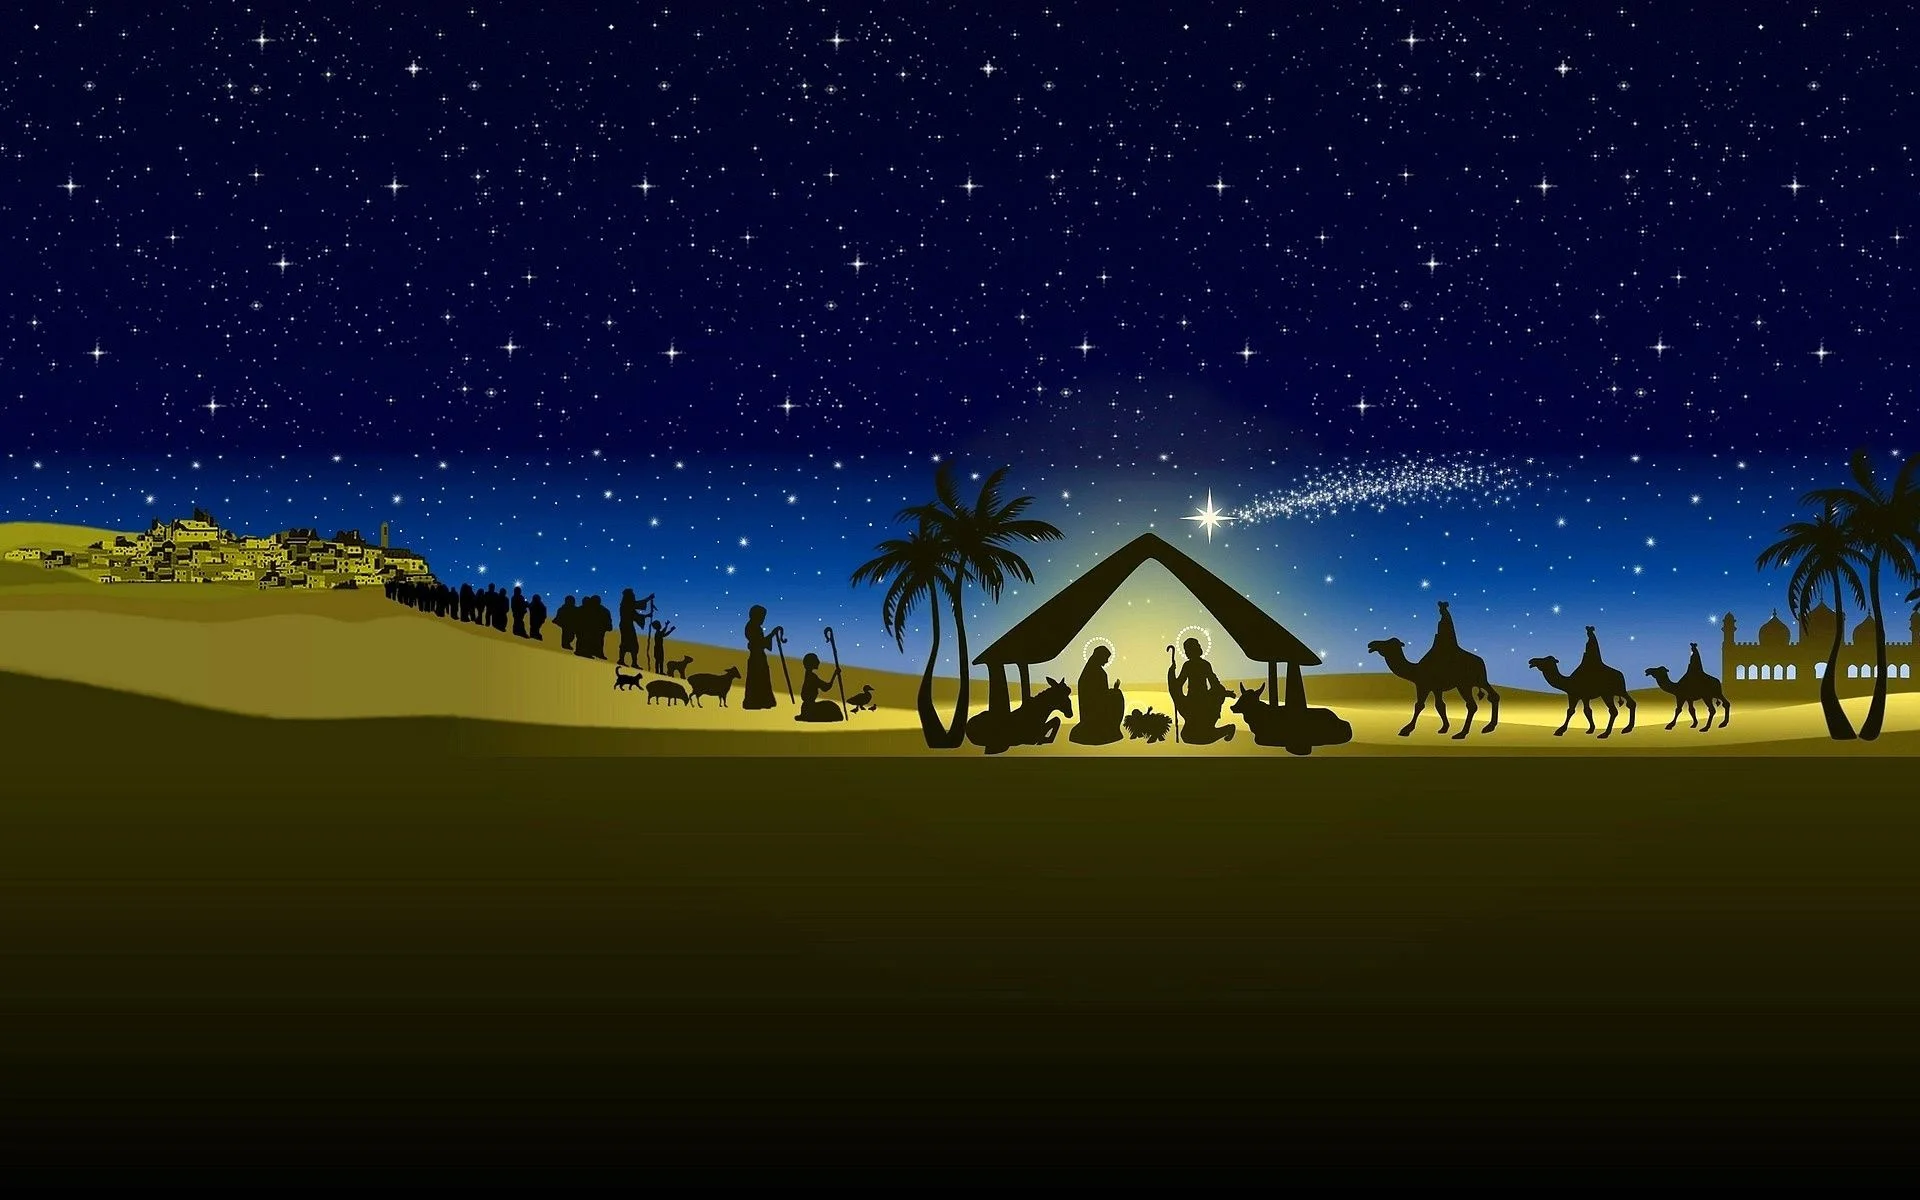 Christmas nativity background images nativity vector hd wallpaper